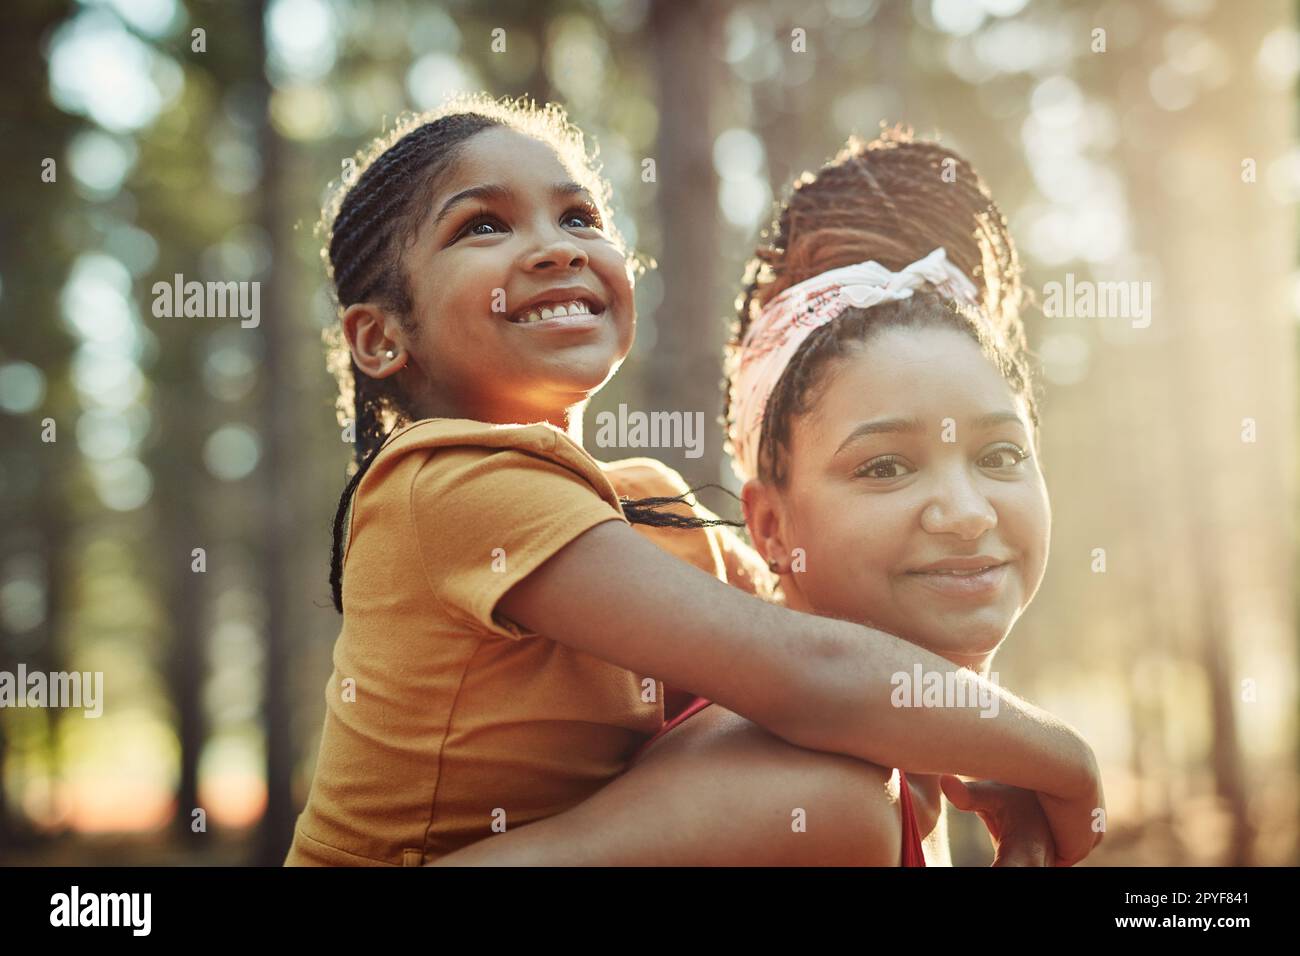 Having some fun with Mum in the forest. a mother and her little daughter bonding in the woods. Stock Photo